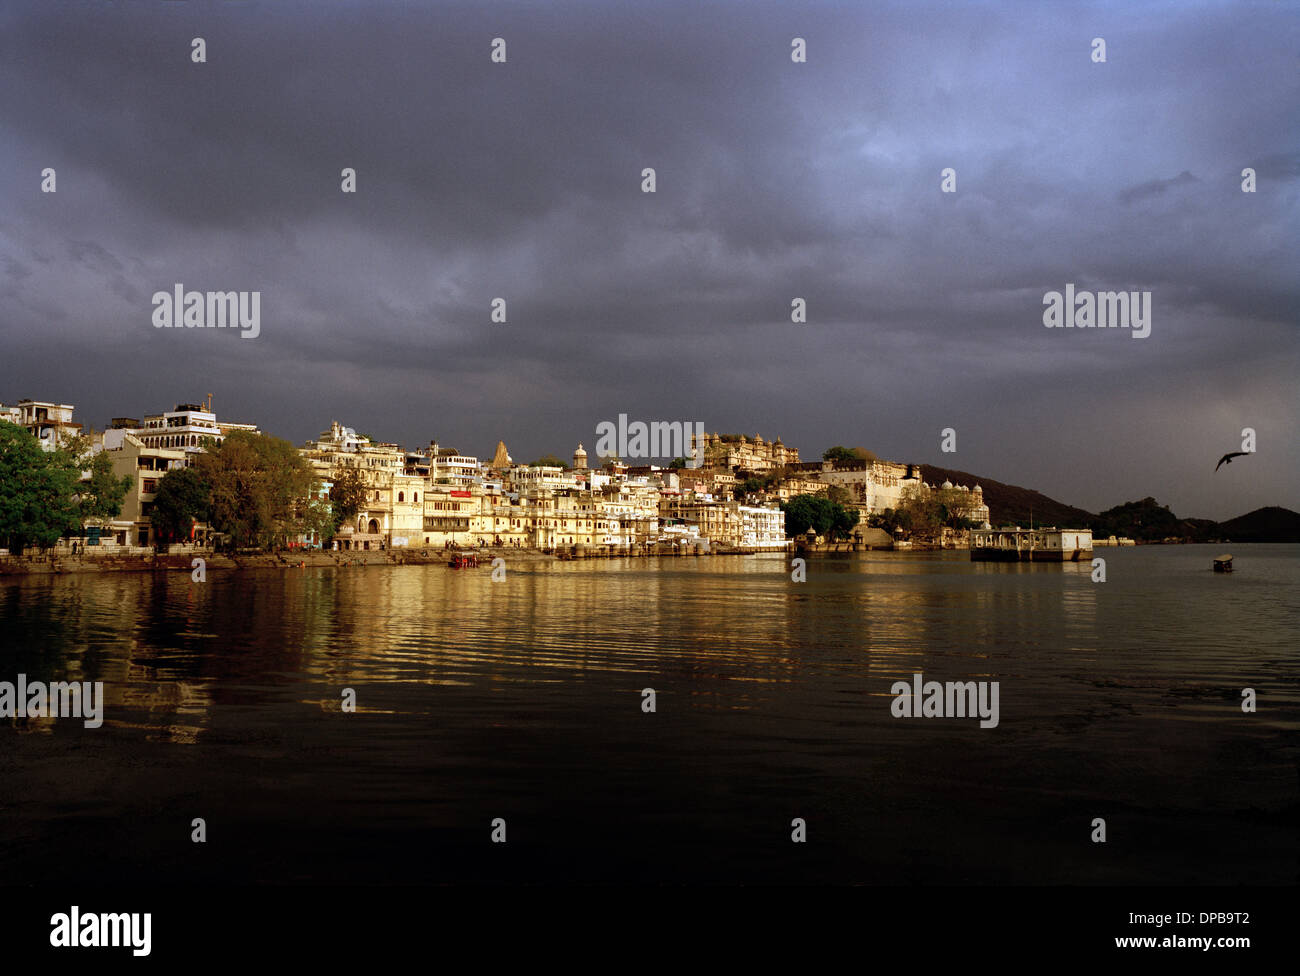 A view across Lake Pichola to the bathing ghats and the City Palace in Udaipur in Rajasthan in India in South Asia. Sunset Sky Stormy Weather View Stock Photo